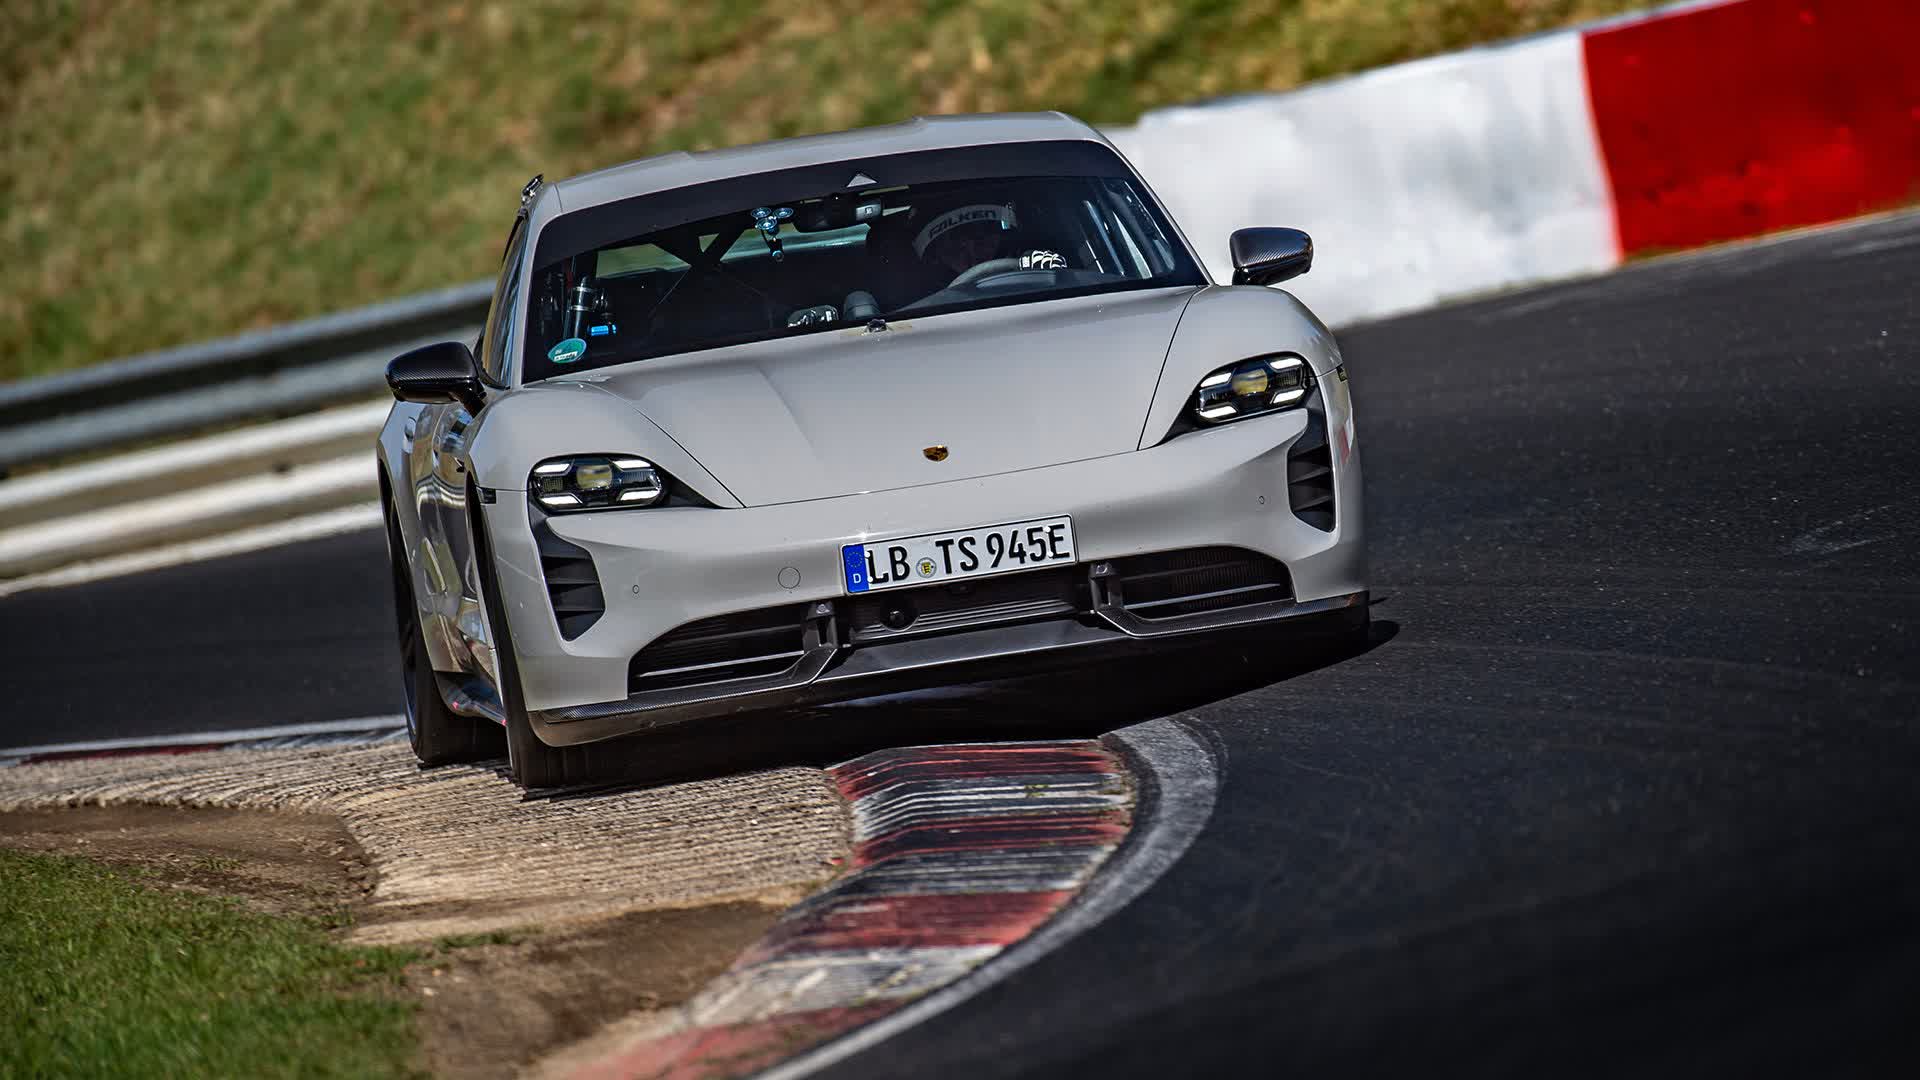 Porsche Taycan Turbo S leapfrogs Tesla Model S Plaid to become fastest production EV at the Nürburgring